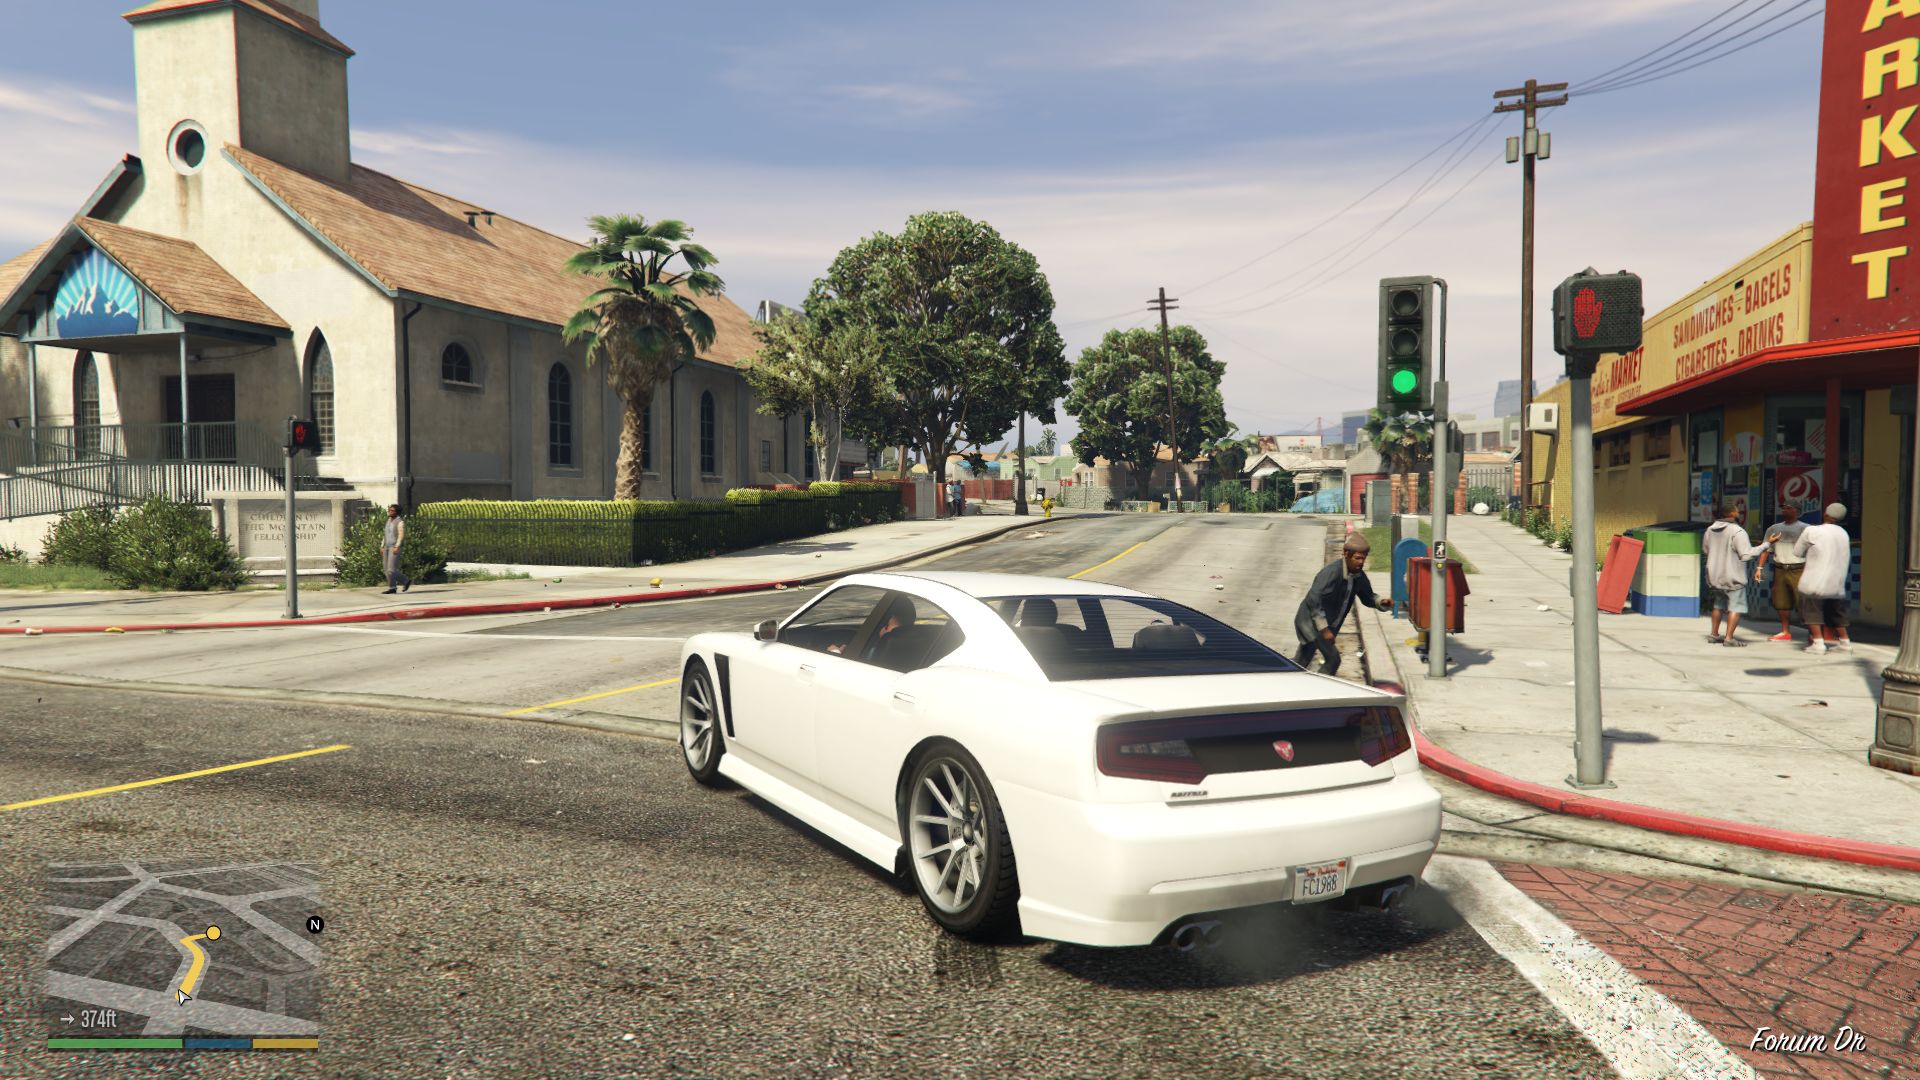 Intel Iris Xe G7 can run GTA V at 1080p 60 FPS on normal settings, is